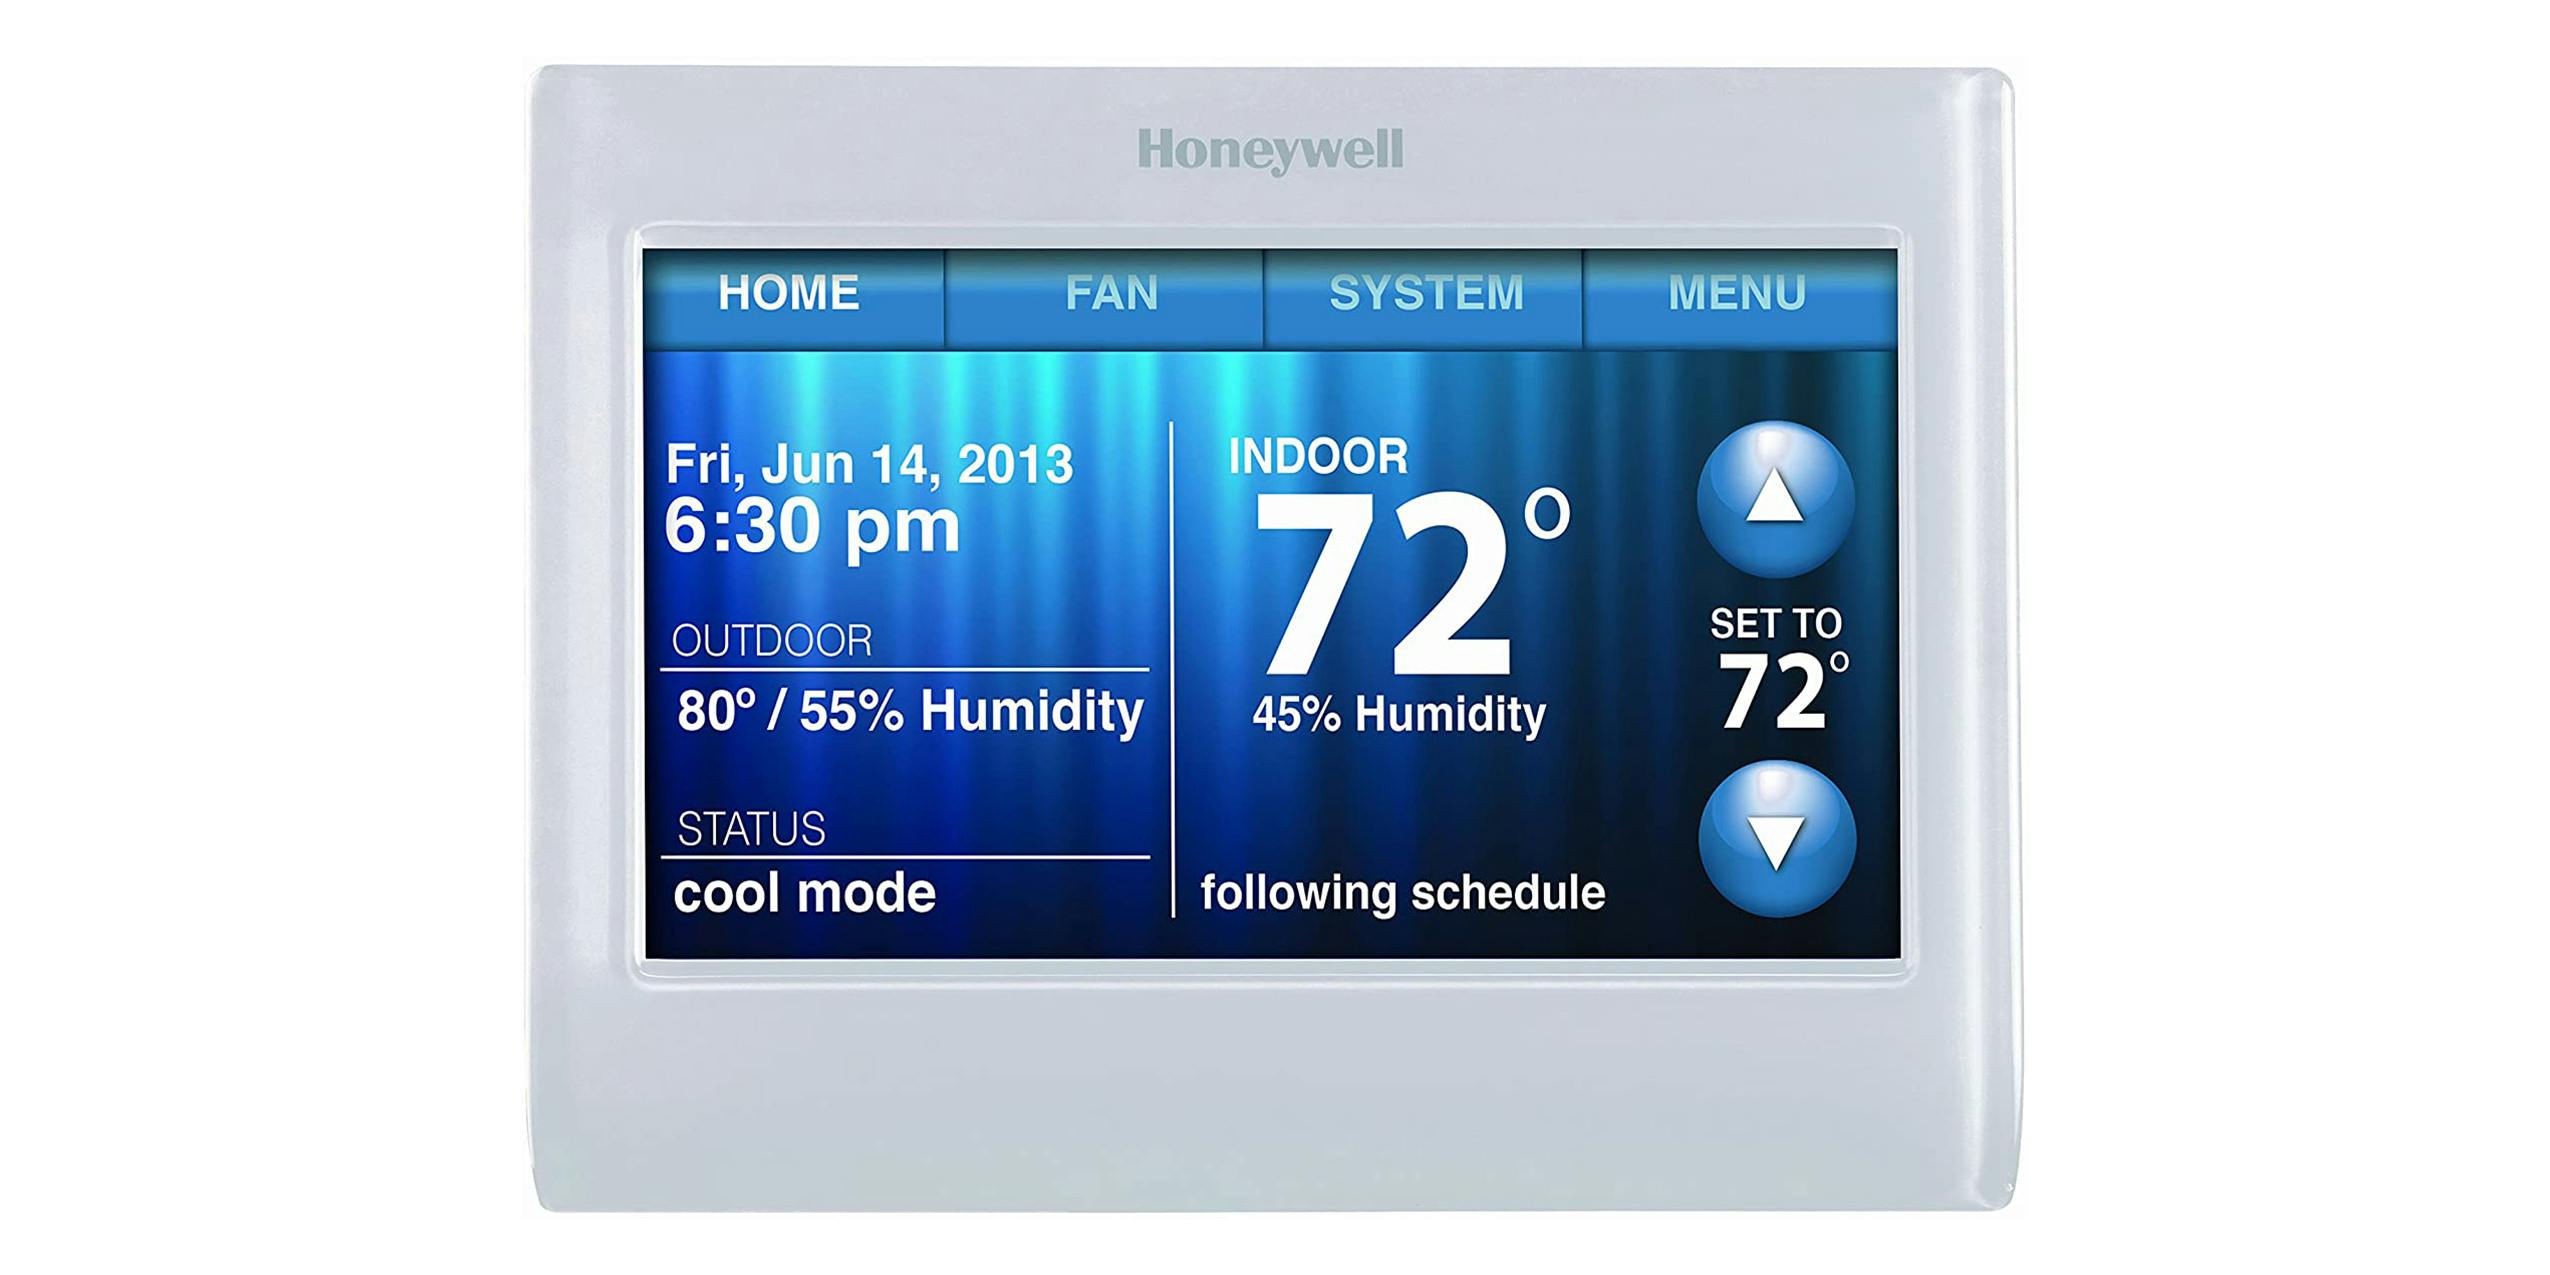 A Honeywell Wireless Thermostat product image.